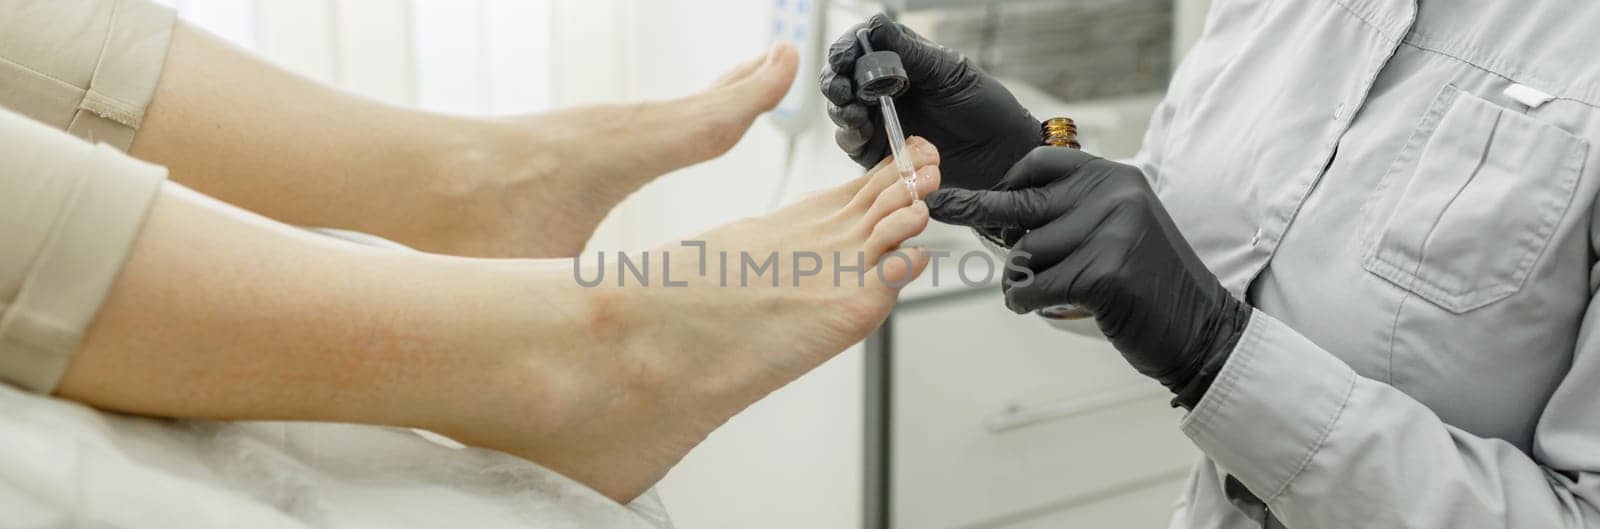 Therapeutic pedicure. The pedicure master applies a softening oil or a medicinal product in a pipette to the nails